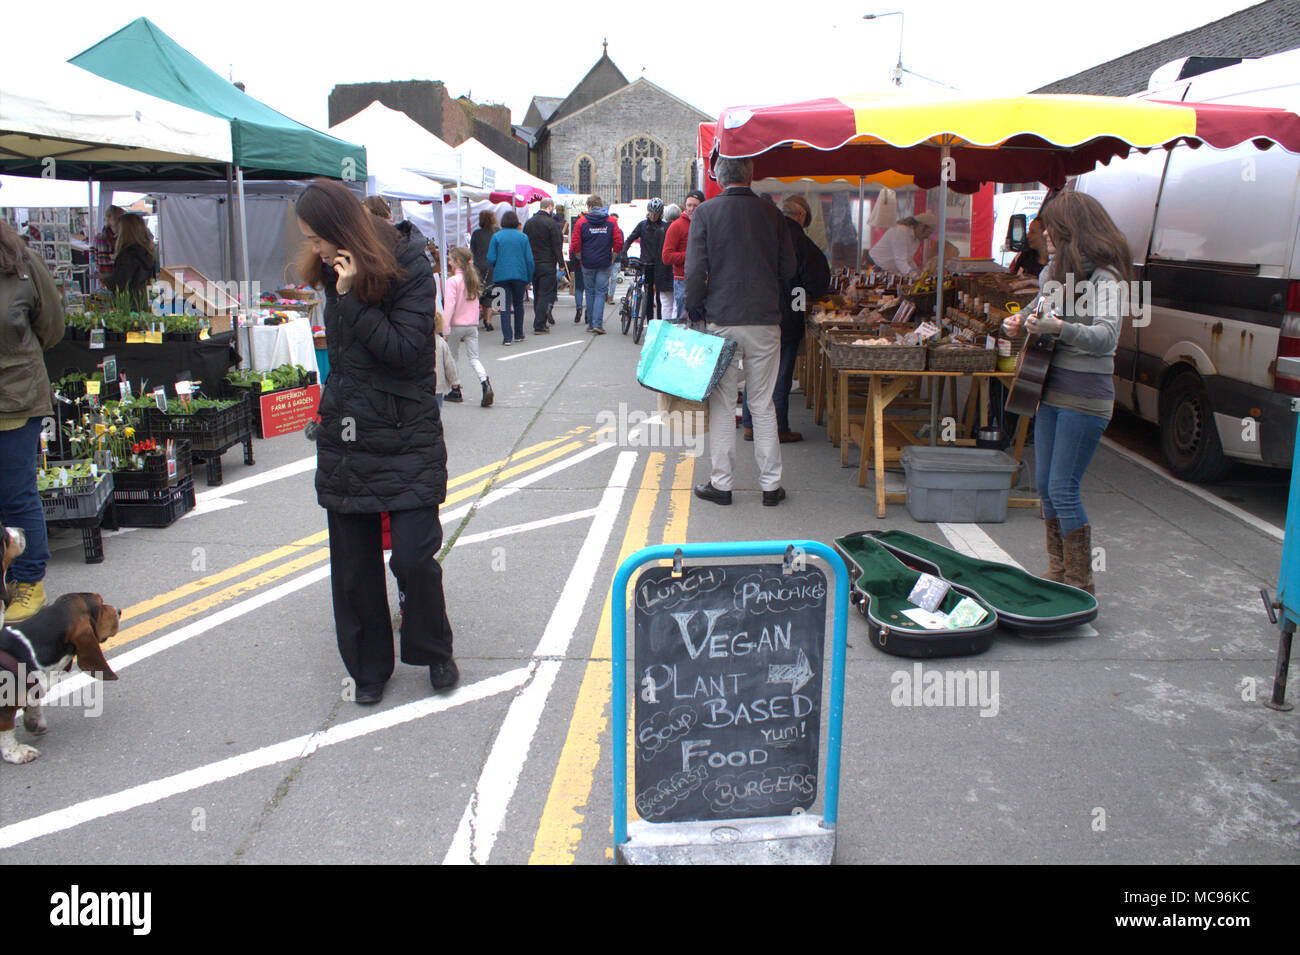 a weekly country food market full food stalls and full of people shopping and bargain hunting in skibbereen, ireland,a popular holiday town. Stock Photo